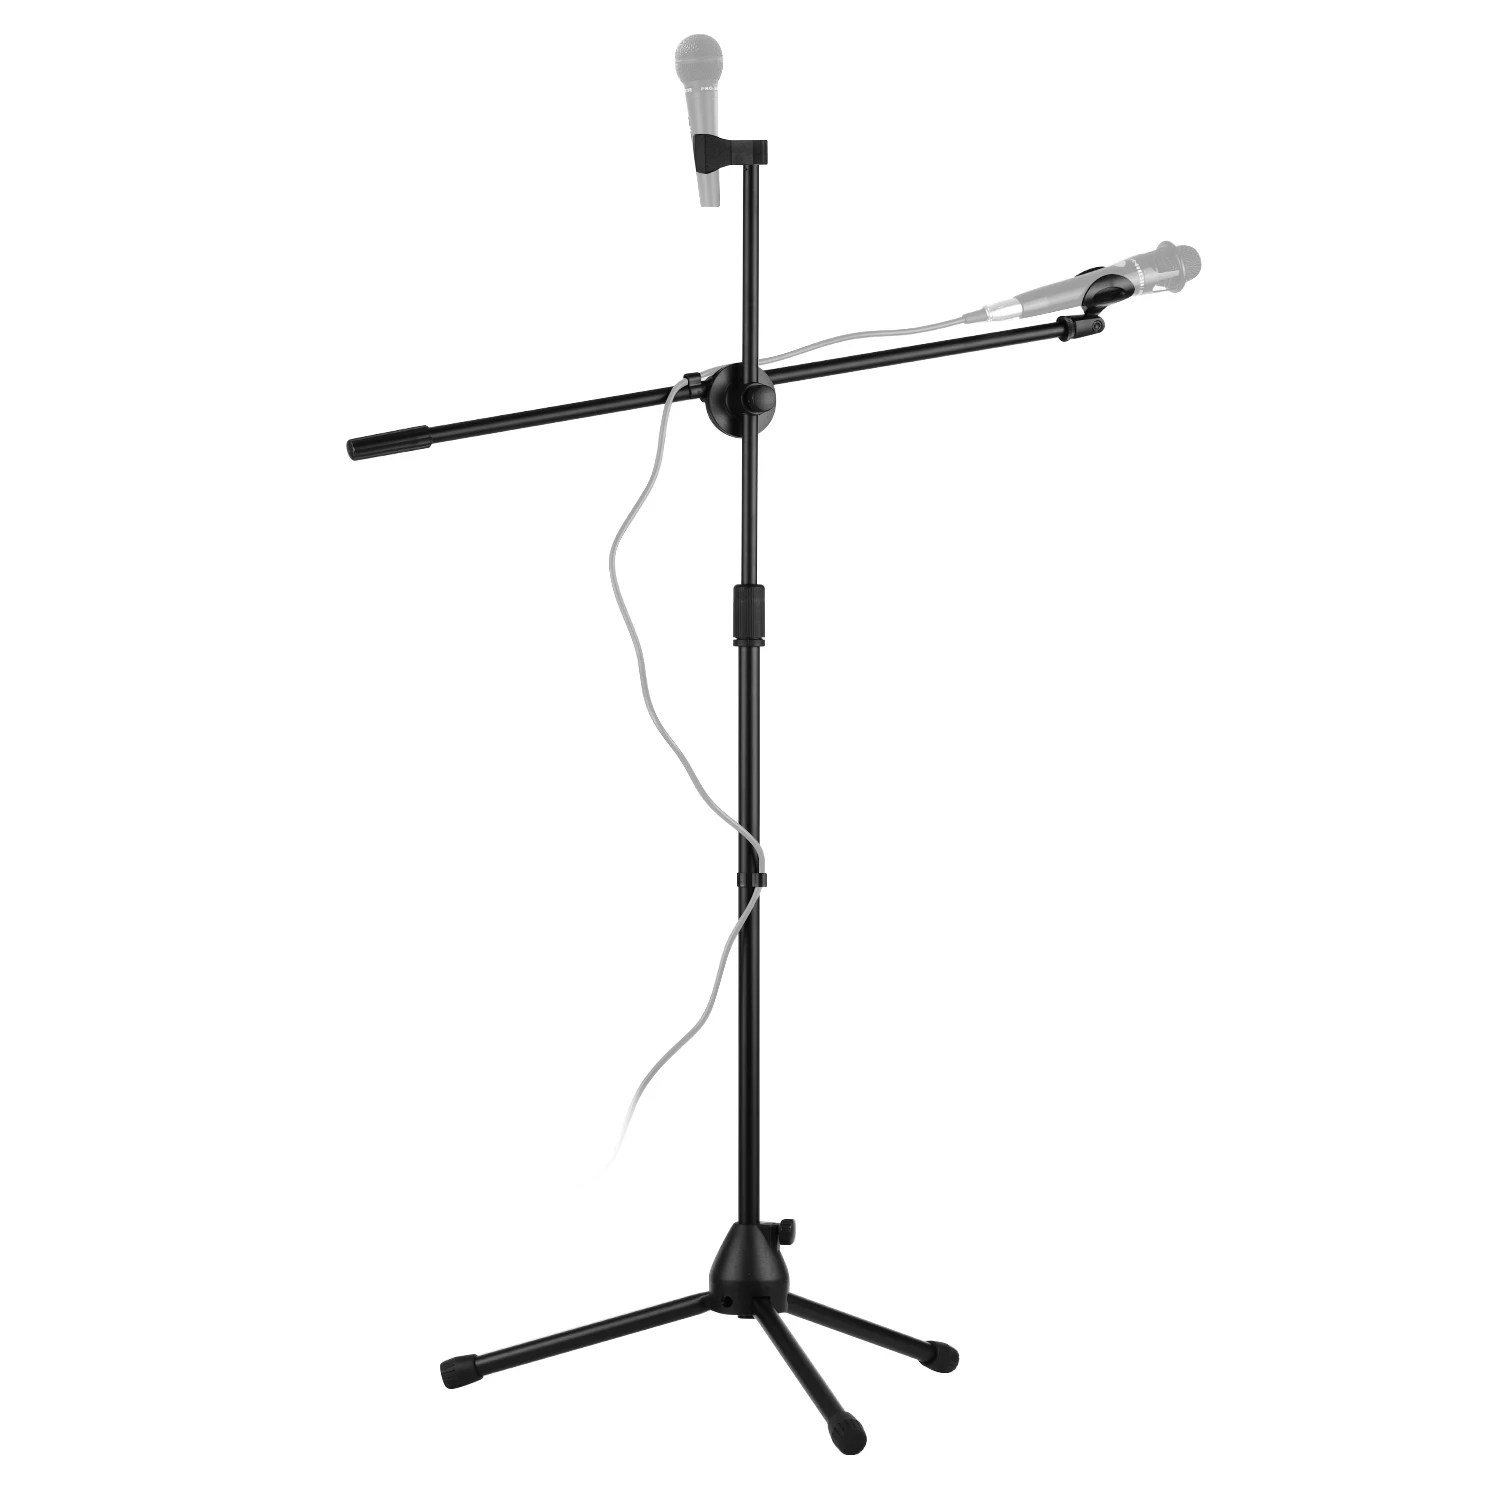 

Microphone Tripod Stand Boom Floor Model Adjustable Height Light Weight Heavy Duty Collapsible with 2 Mic Clip Holders Black